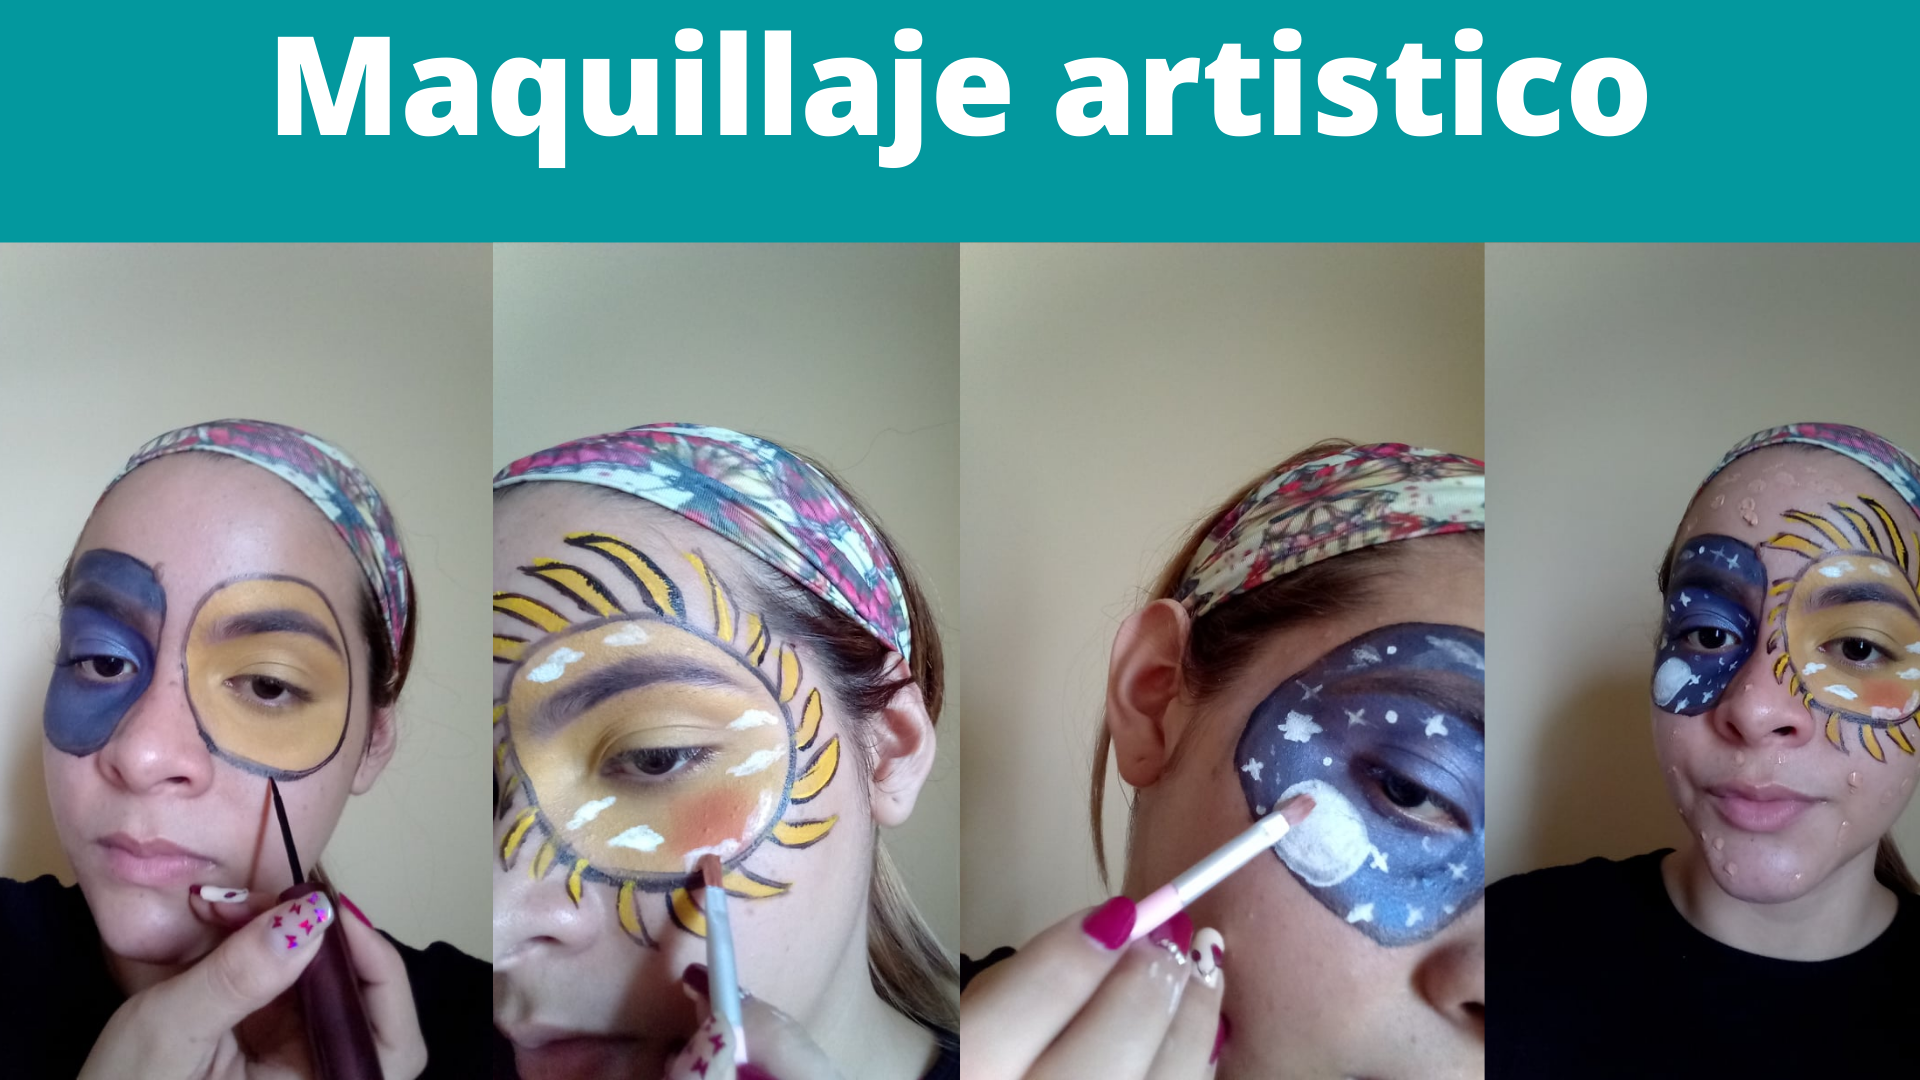 Maquillaje artistico (2).png